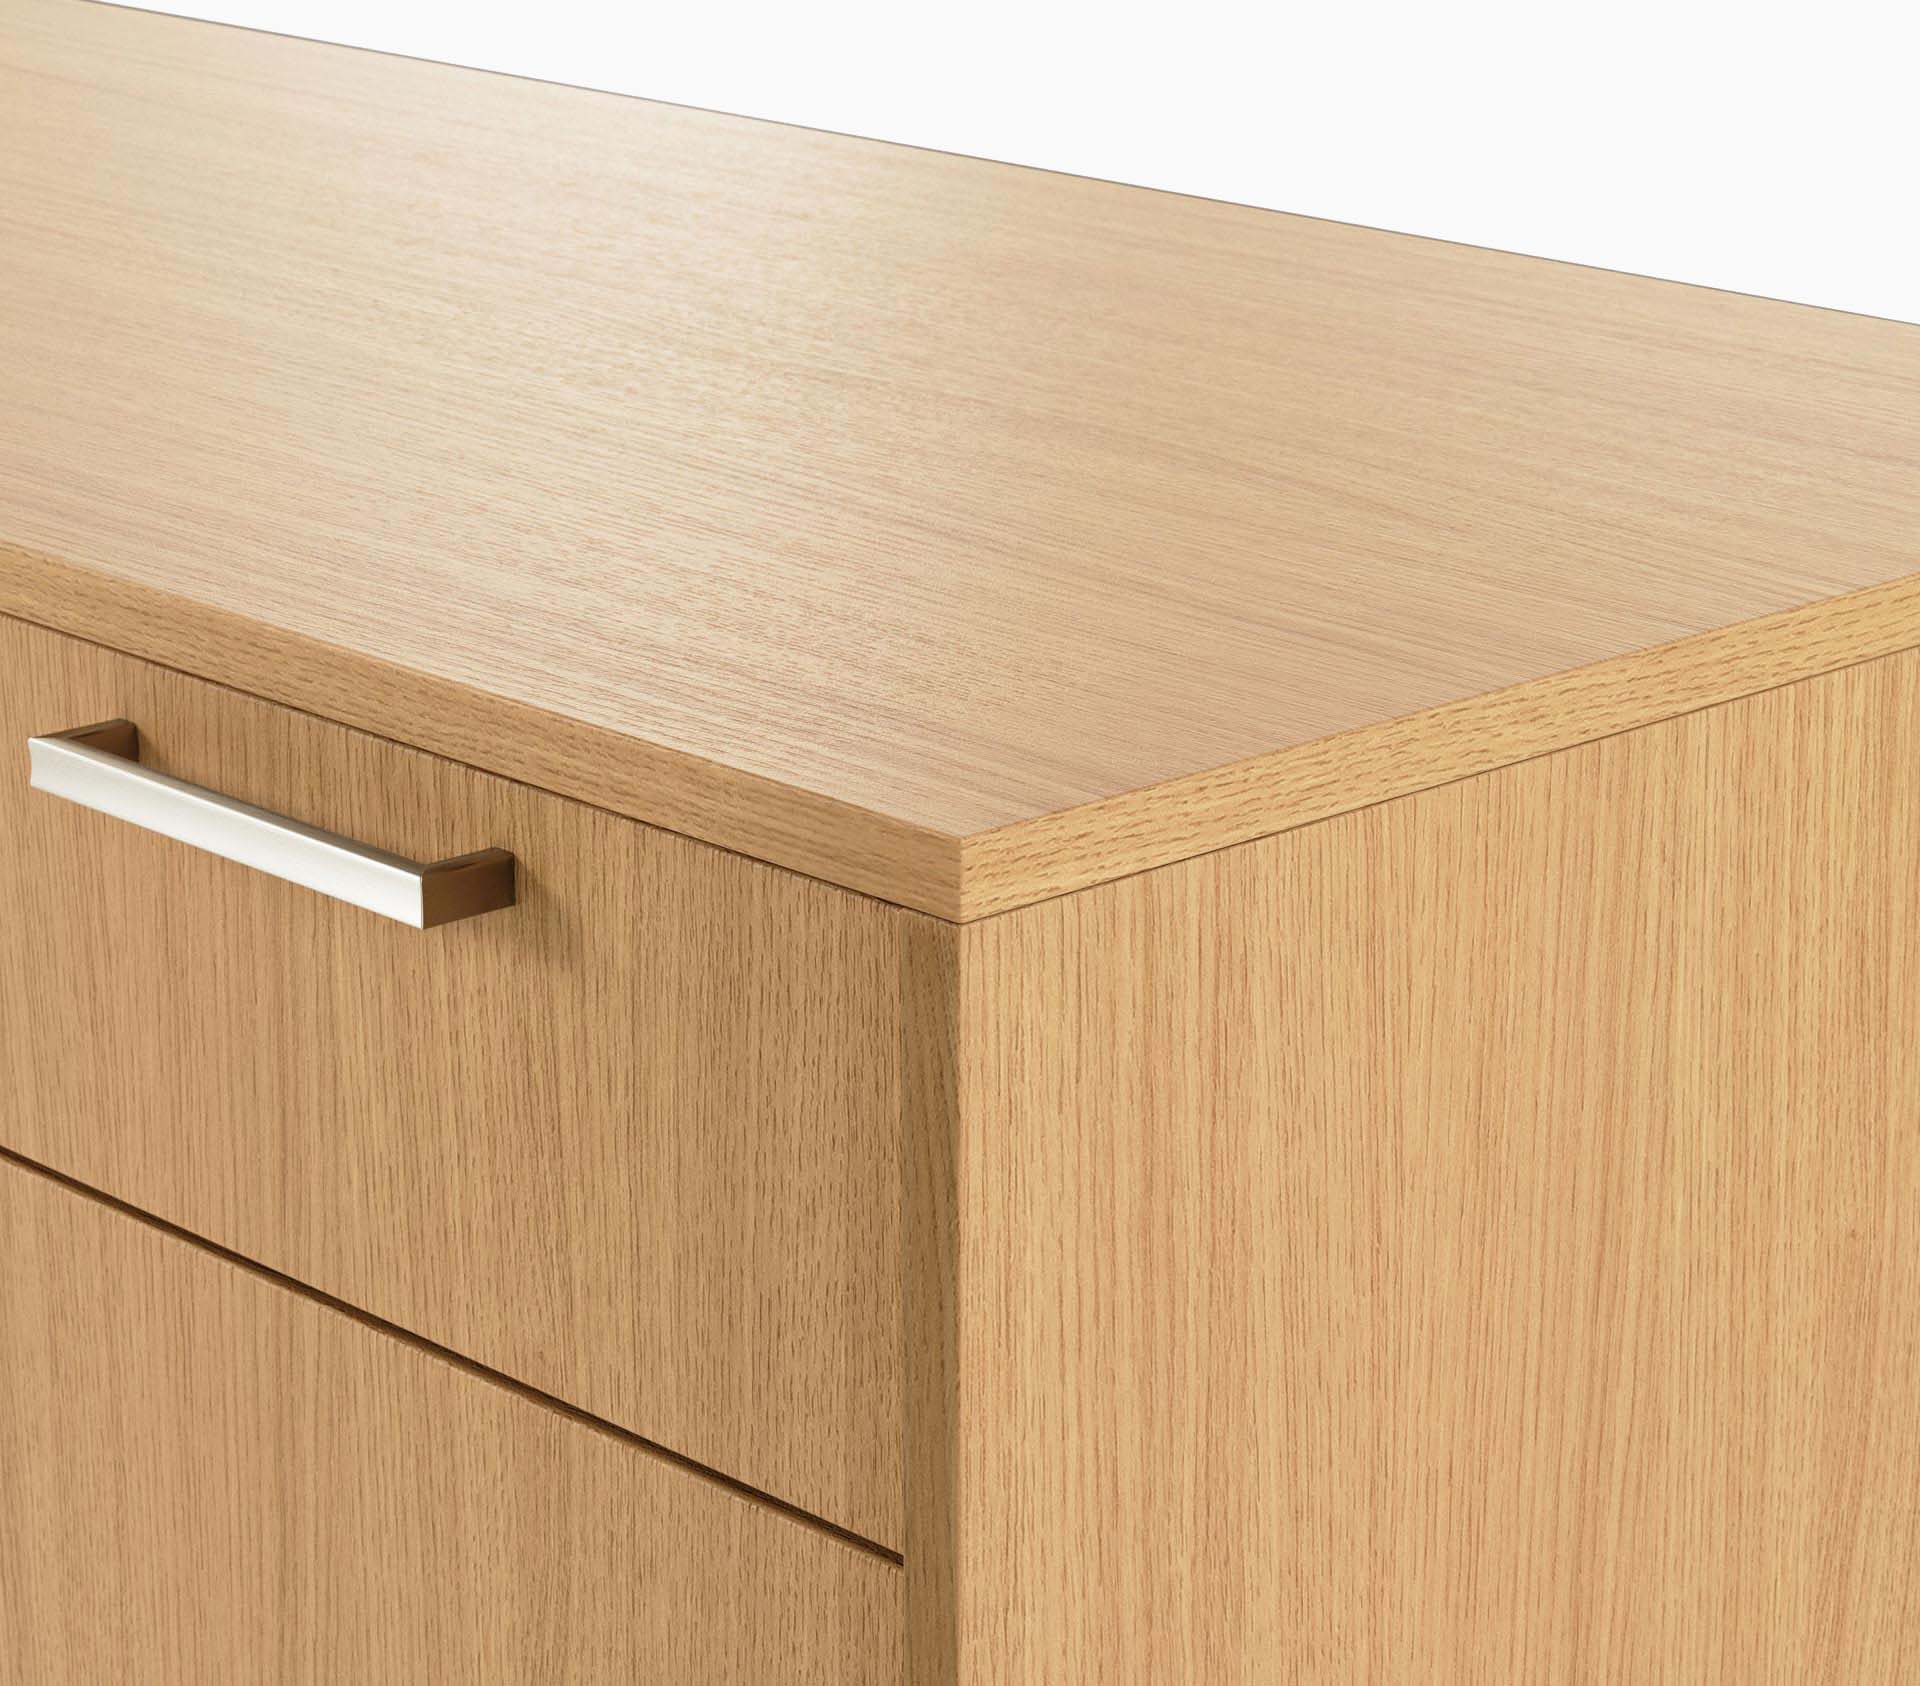 Edge detail on a JD Credenza with one box drawer over a hinged door in natural rift cut oak with satin nickel drawer pulls